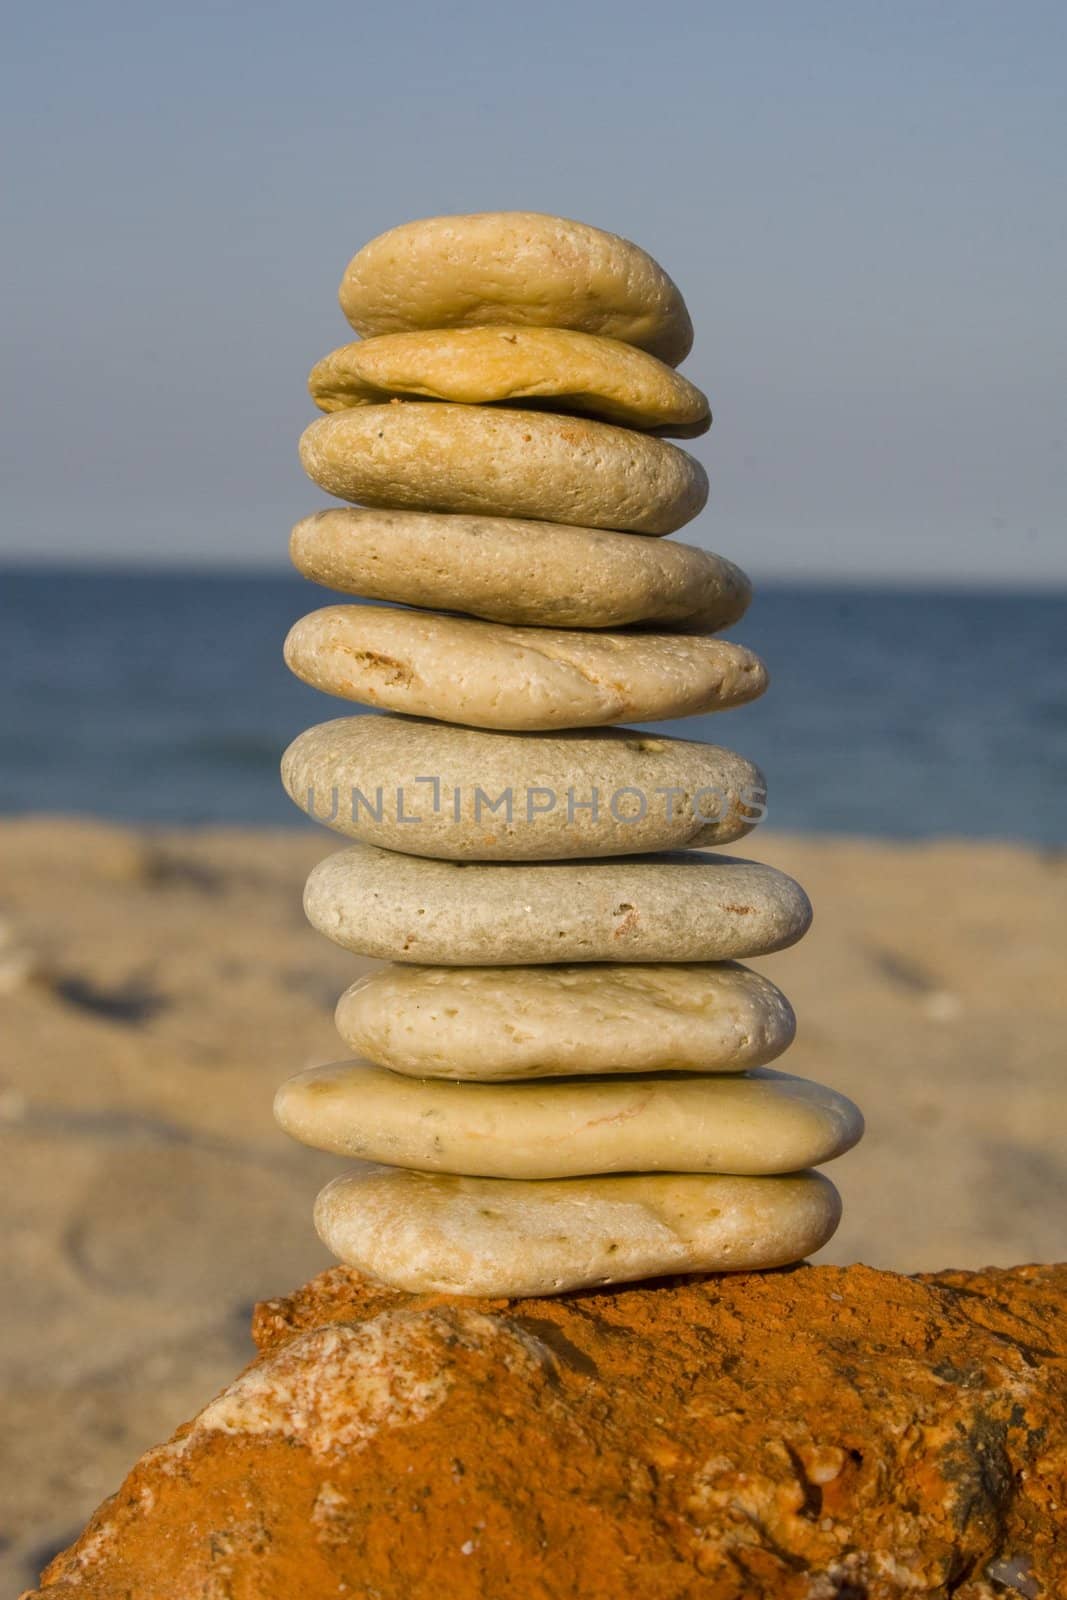 Nicely stacked tower of rocks on beach